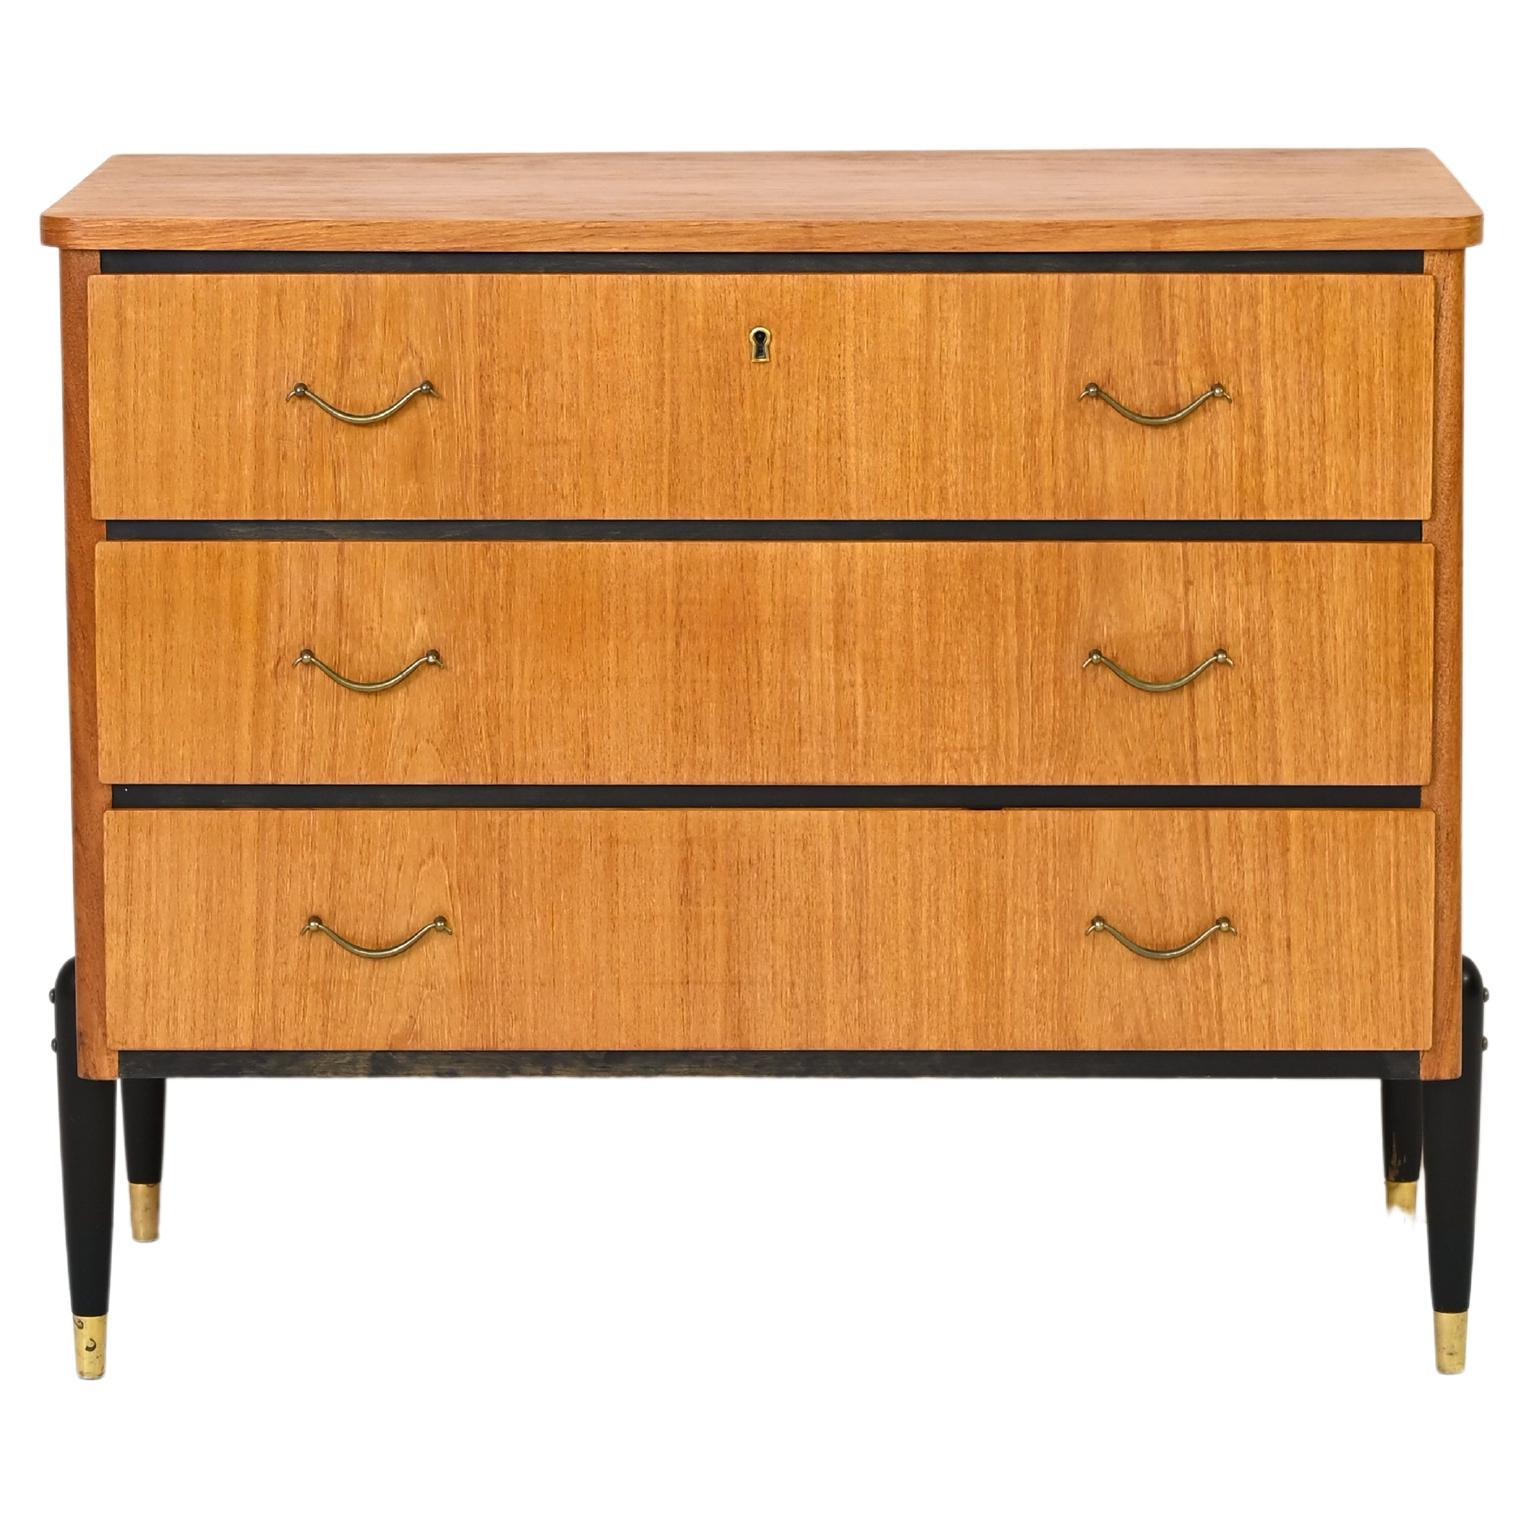 Scandinavian Chest of Drawers with Black Details